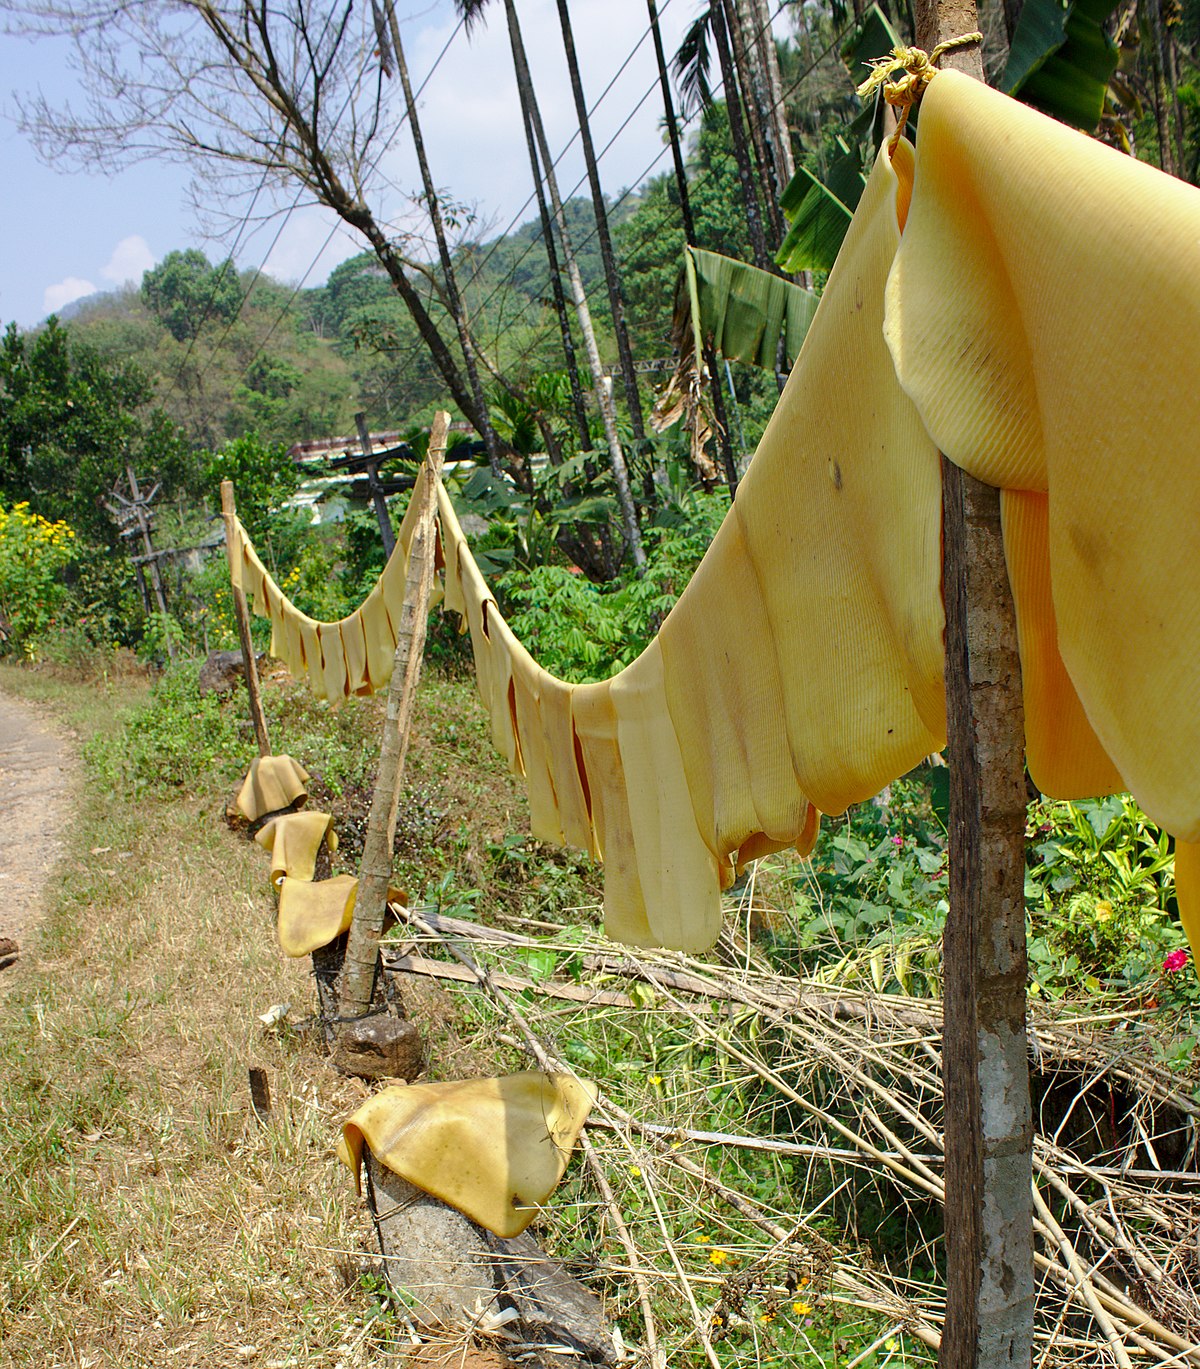 File:Natural rubber drying 2.jpg - Wikimedia Commons